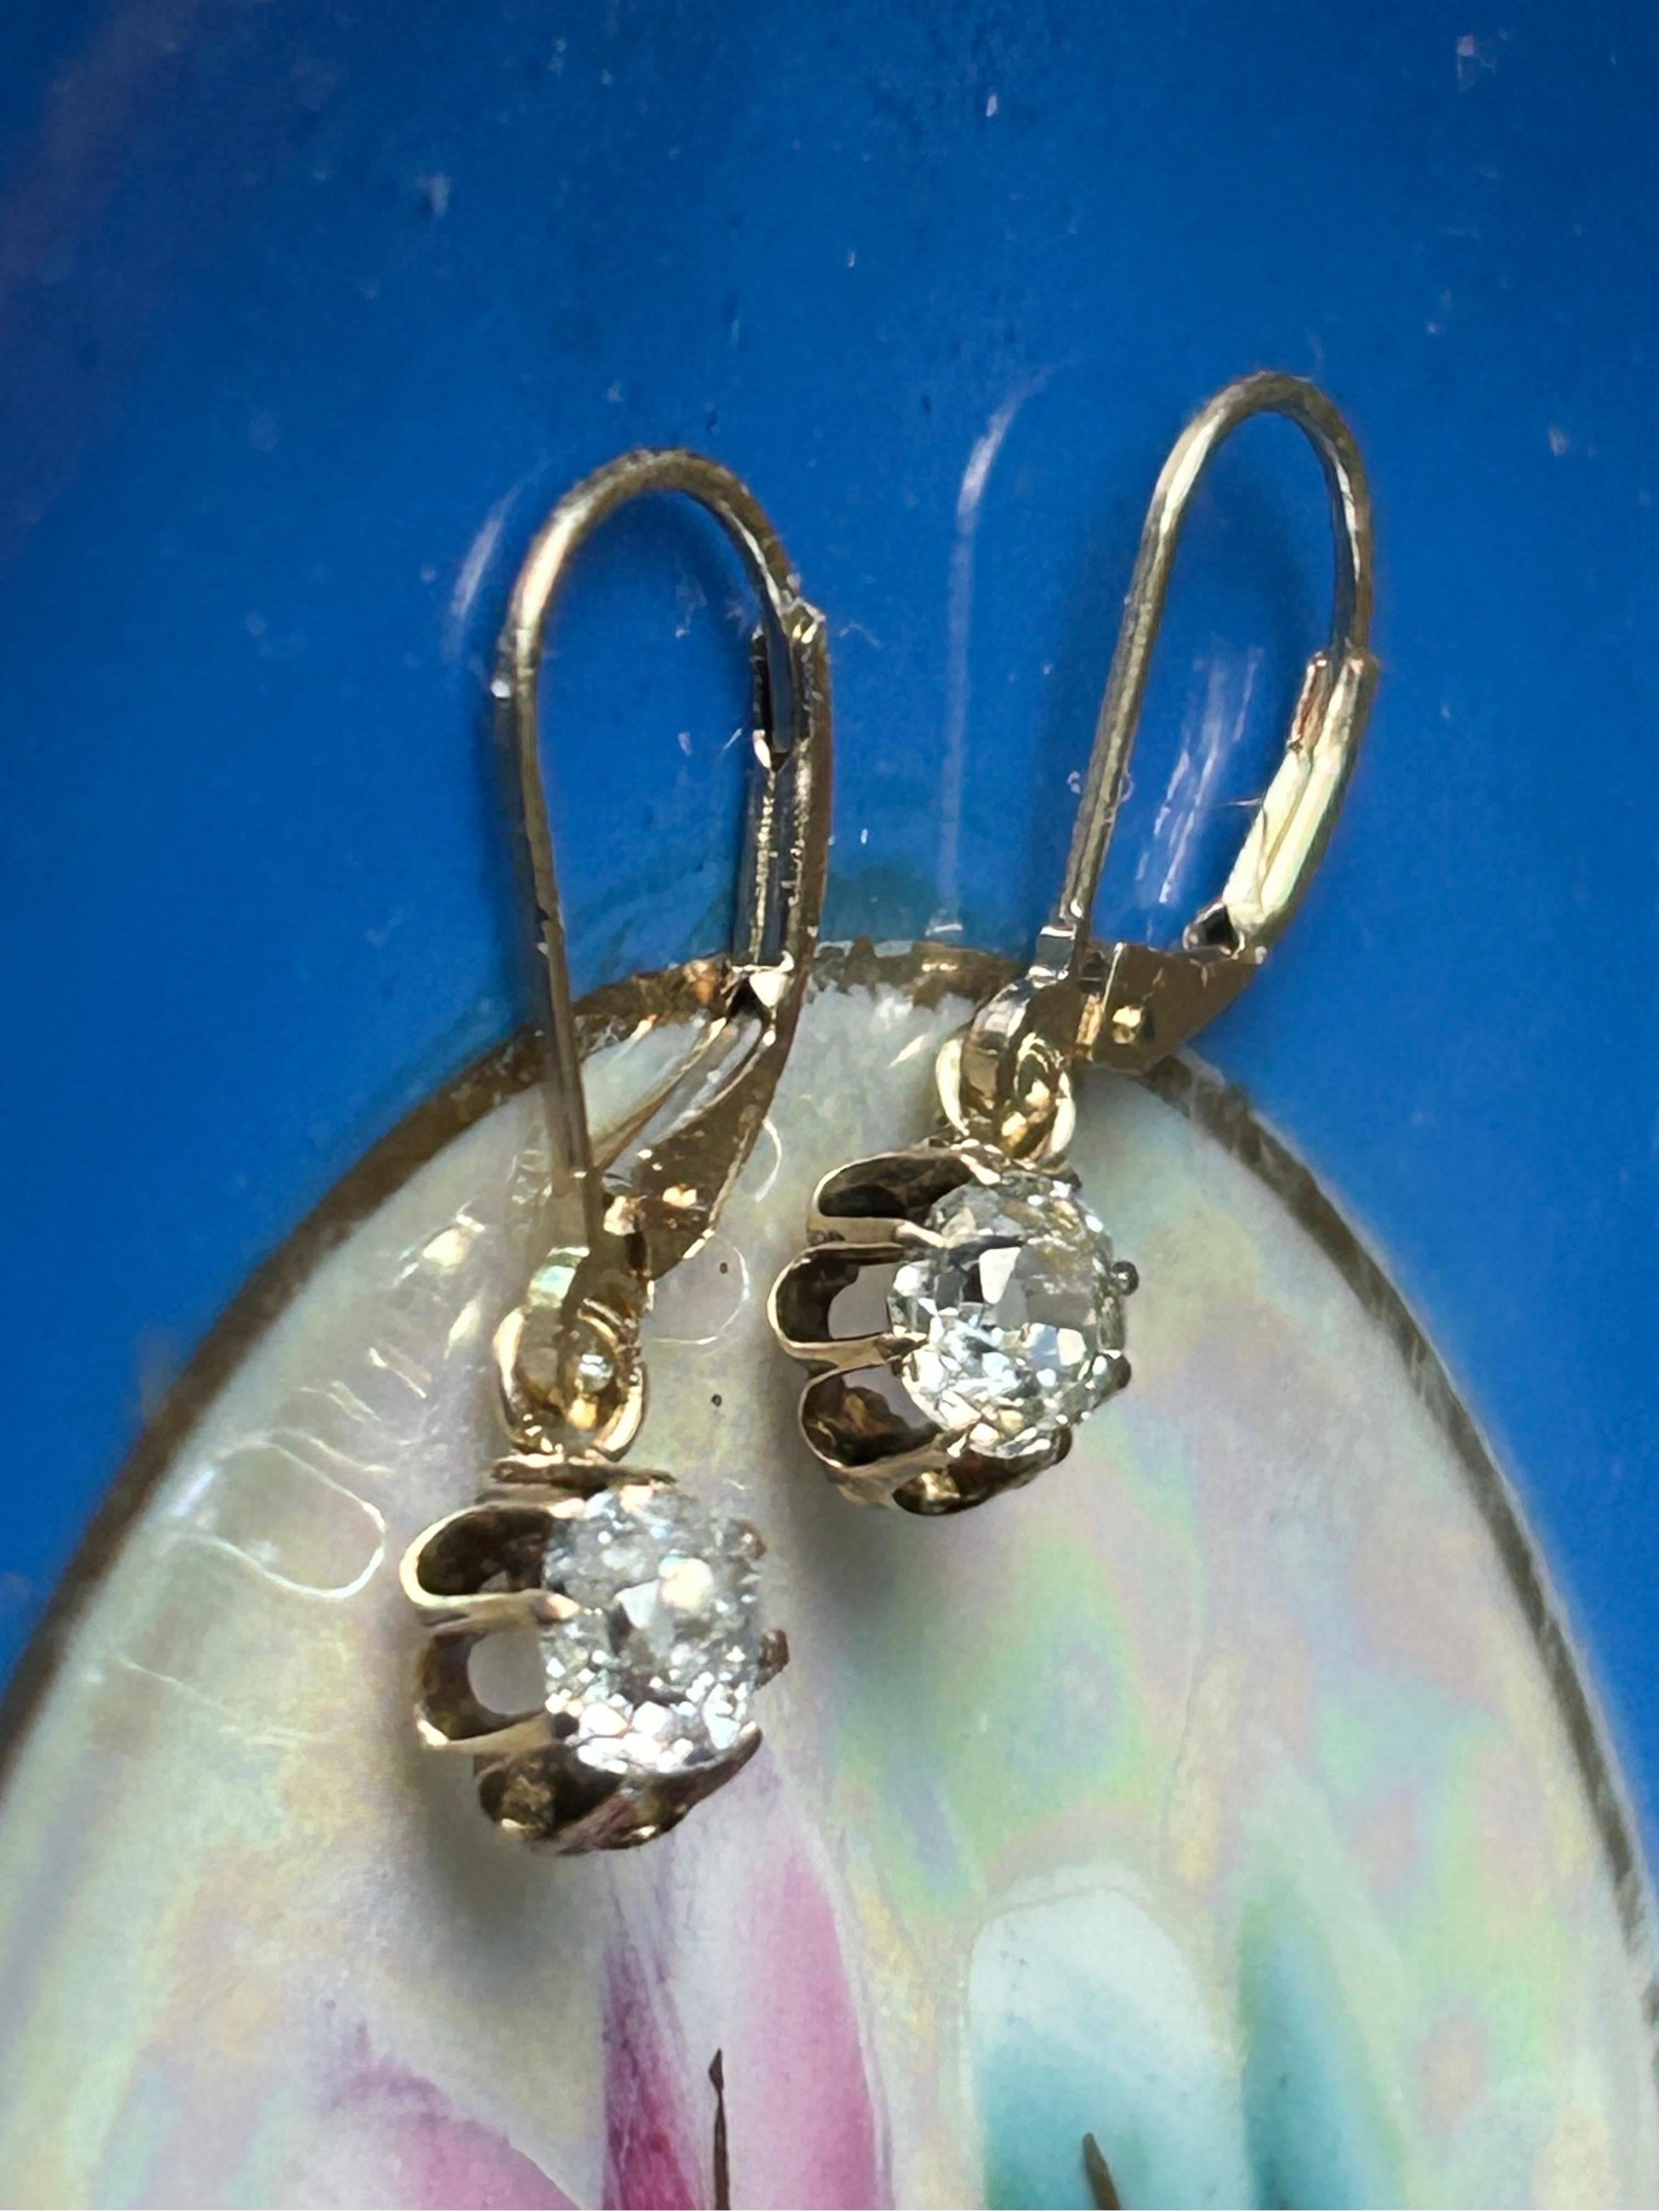 Antique Victorian Dangle Old Mine Cut Diamond Earrings with new lever back.
.60 diamond ctw.
CIRCA 1890
The old mine cut diamonds in raised claw settings, approximately 0.60 carats total
The diamonds are bright and lively, one is a slightly tinted